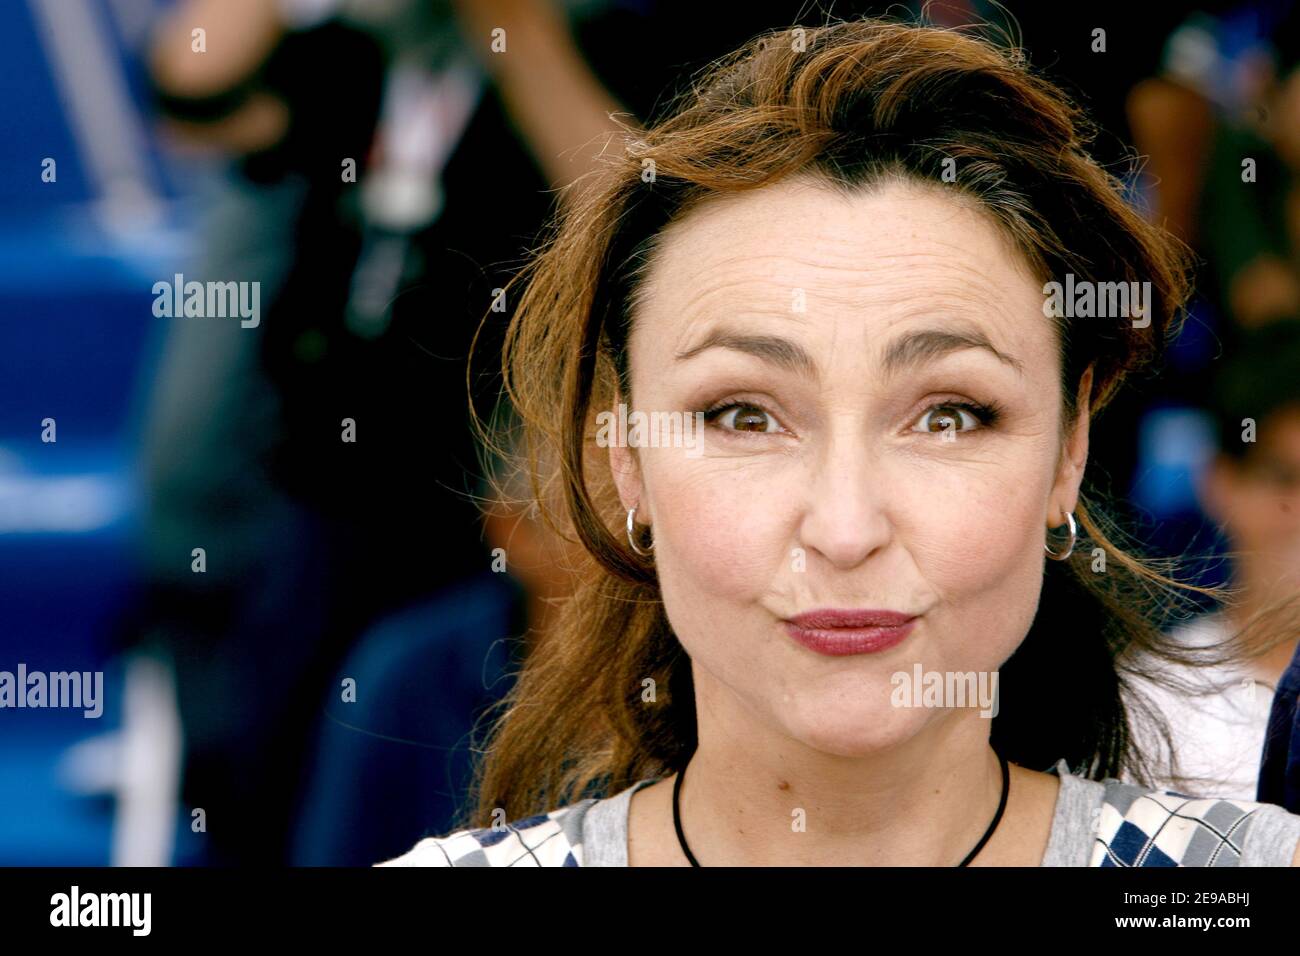 French actress Catherine Frot poses during the photocall of the last Denis Dercourt's movie 'La Tourneuse de Pages' in competition in 'Un certain regard' category during the 59th Cannes Film Festival, in Cannes, France, on May 20, 2006. Photo by Hahn-Nebinger-Orban/ABACAPRESS.COM Stock Photo